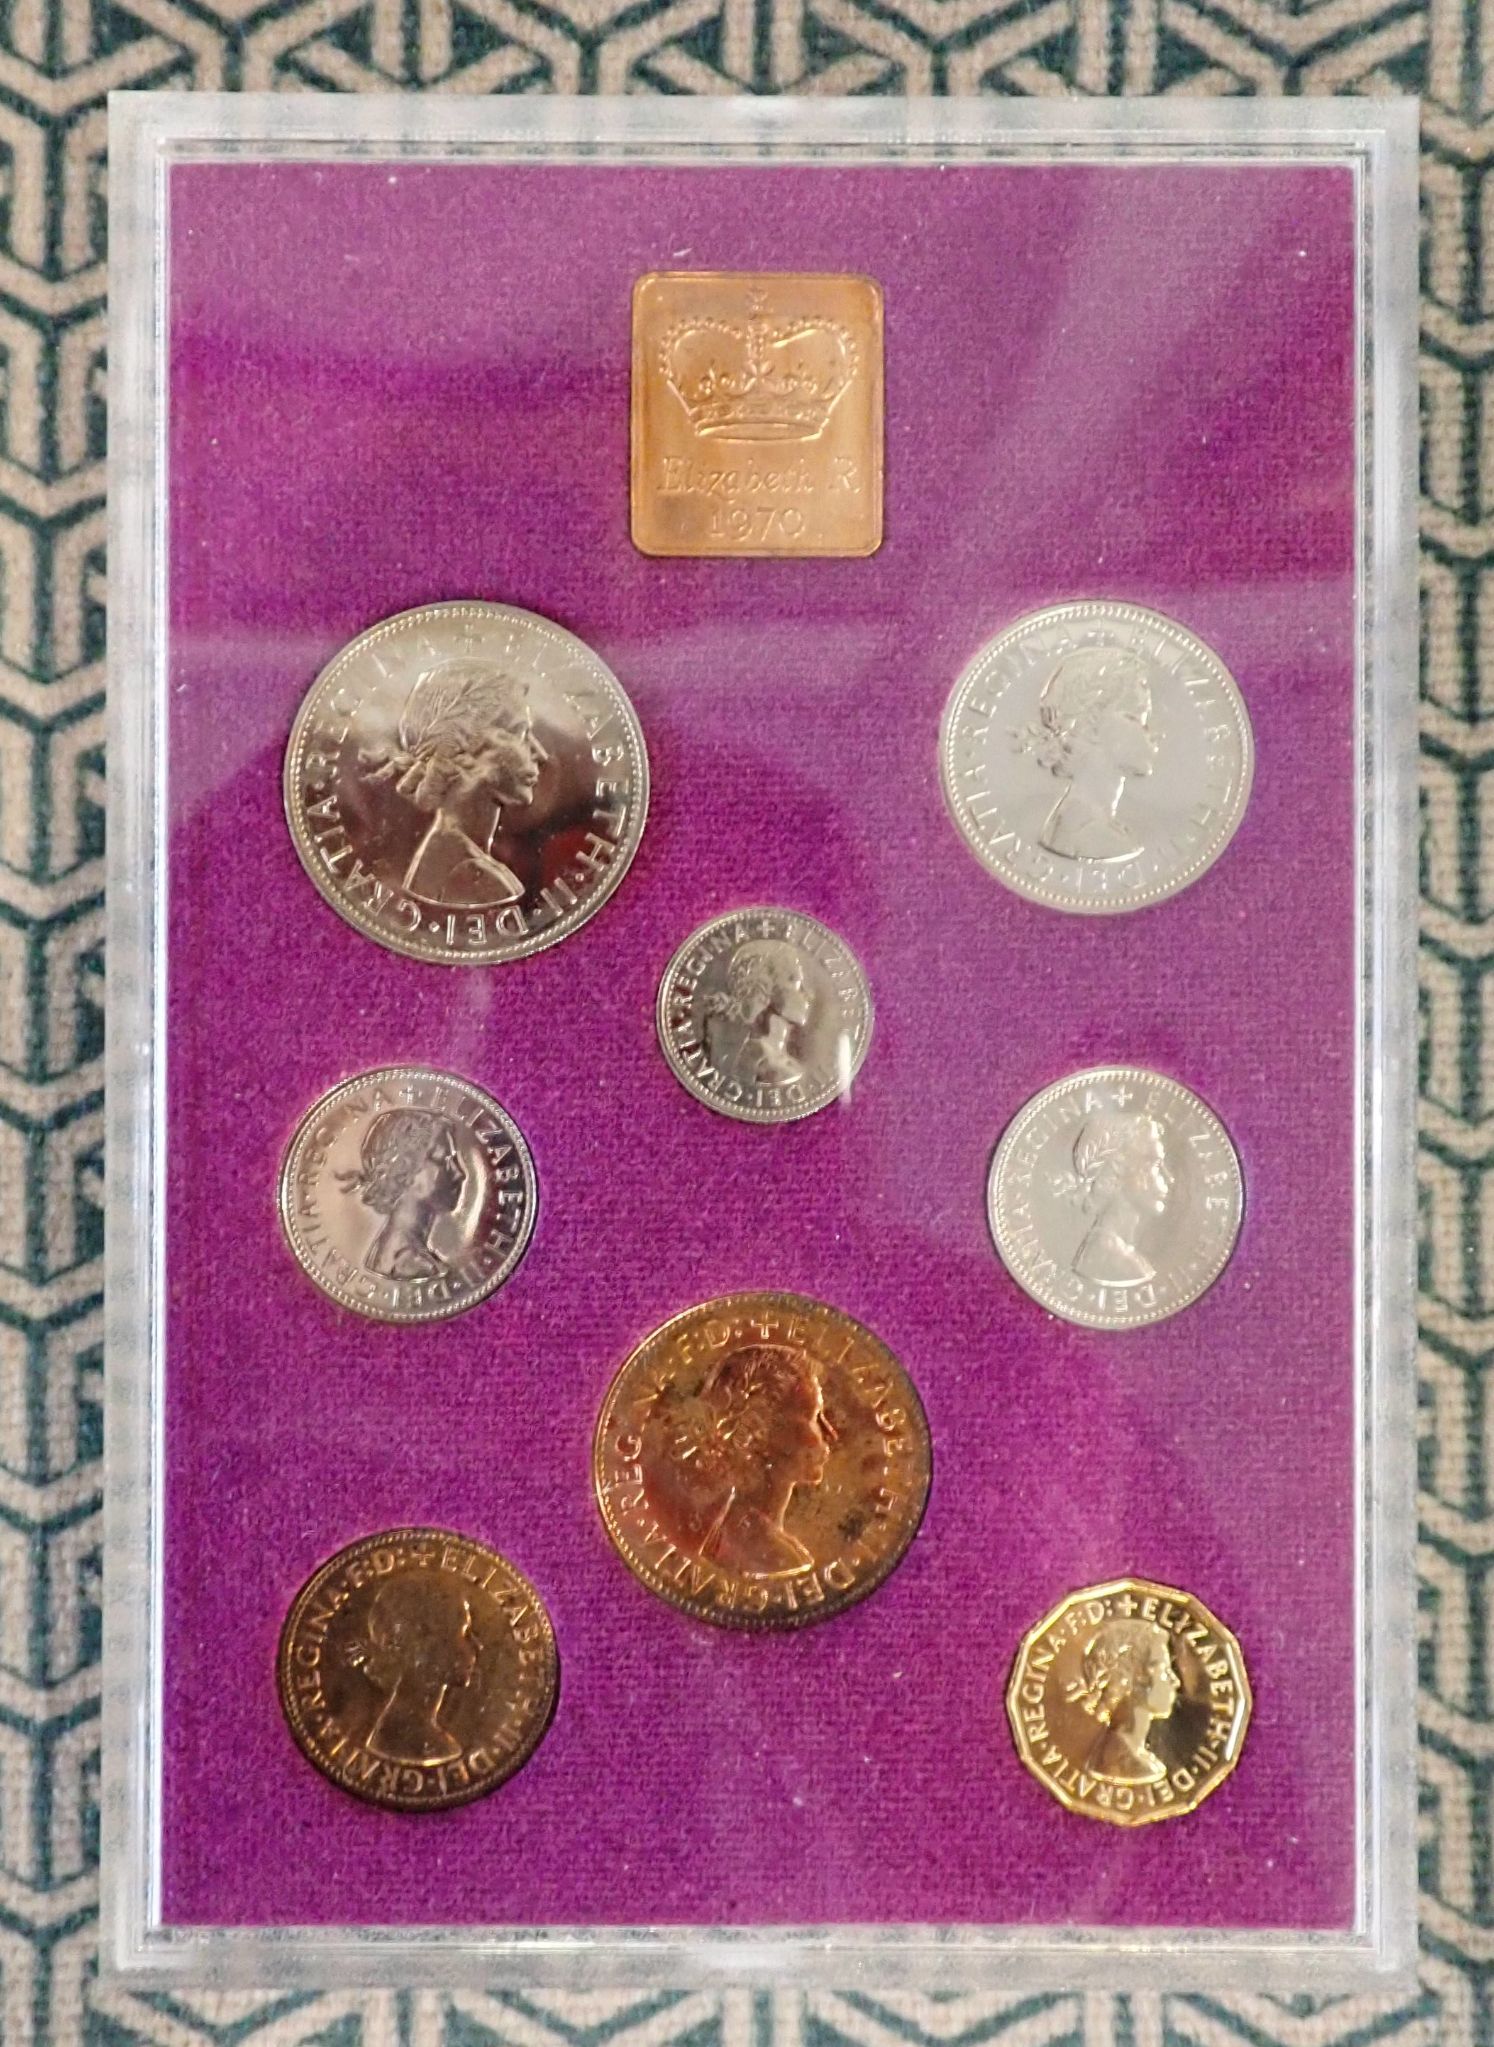 A 1970 GREAT BRITAIN PROOF SPECIMEN COIN SET - Image 3 of 3